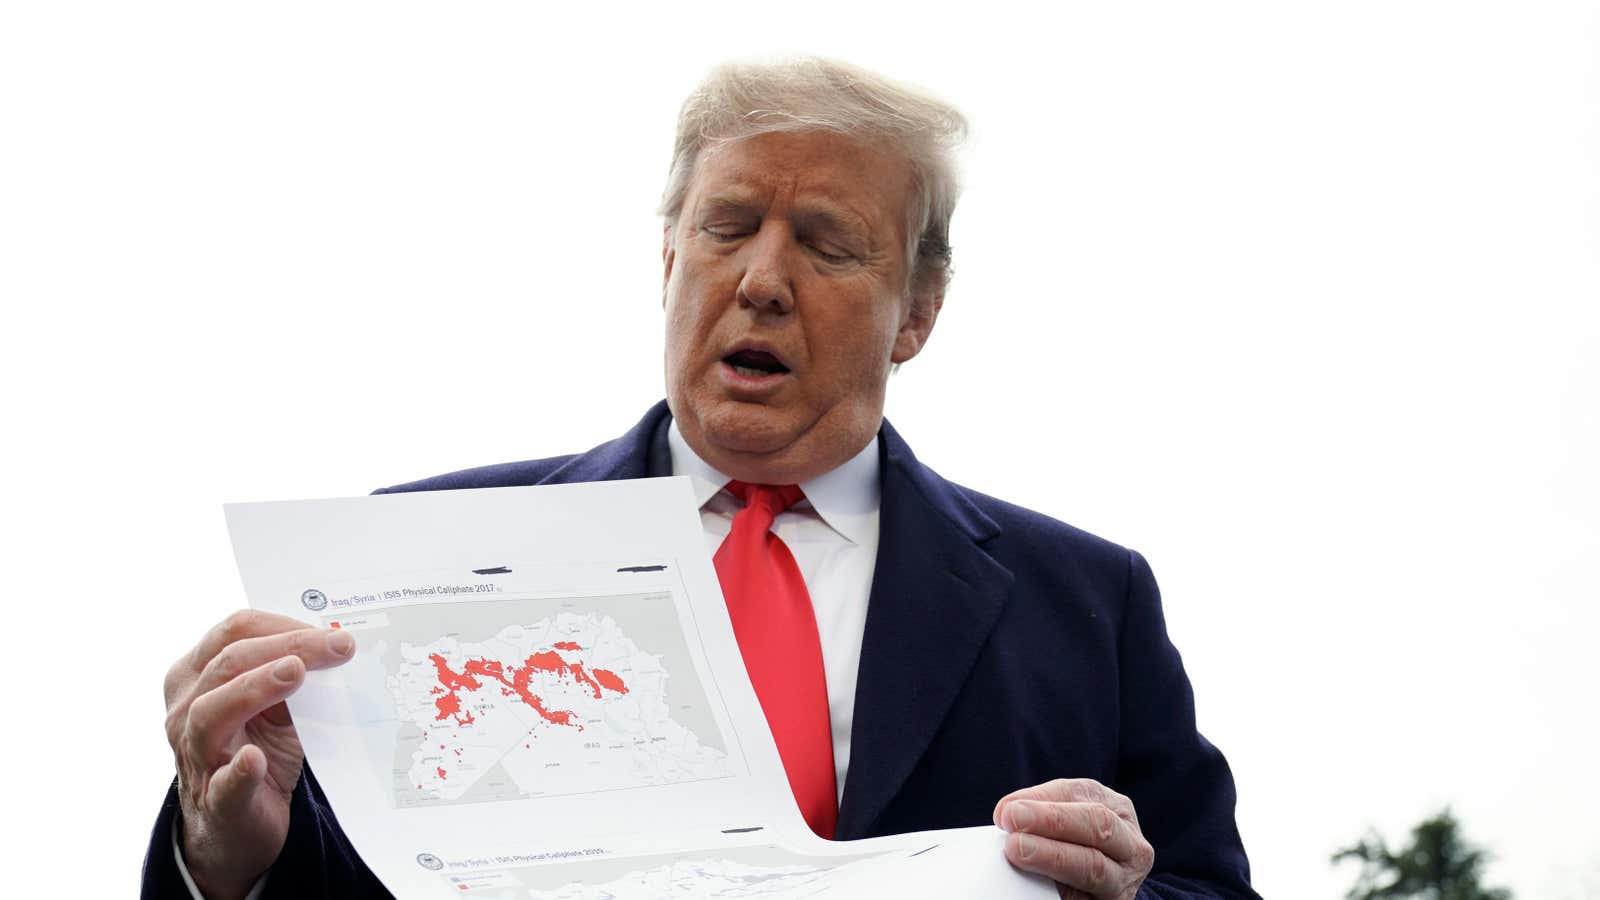 President Donald Trump shows a map of conflicts in Syria and Iraq.